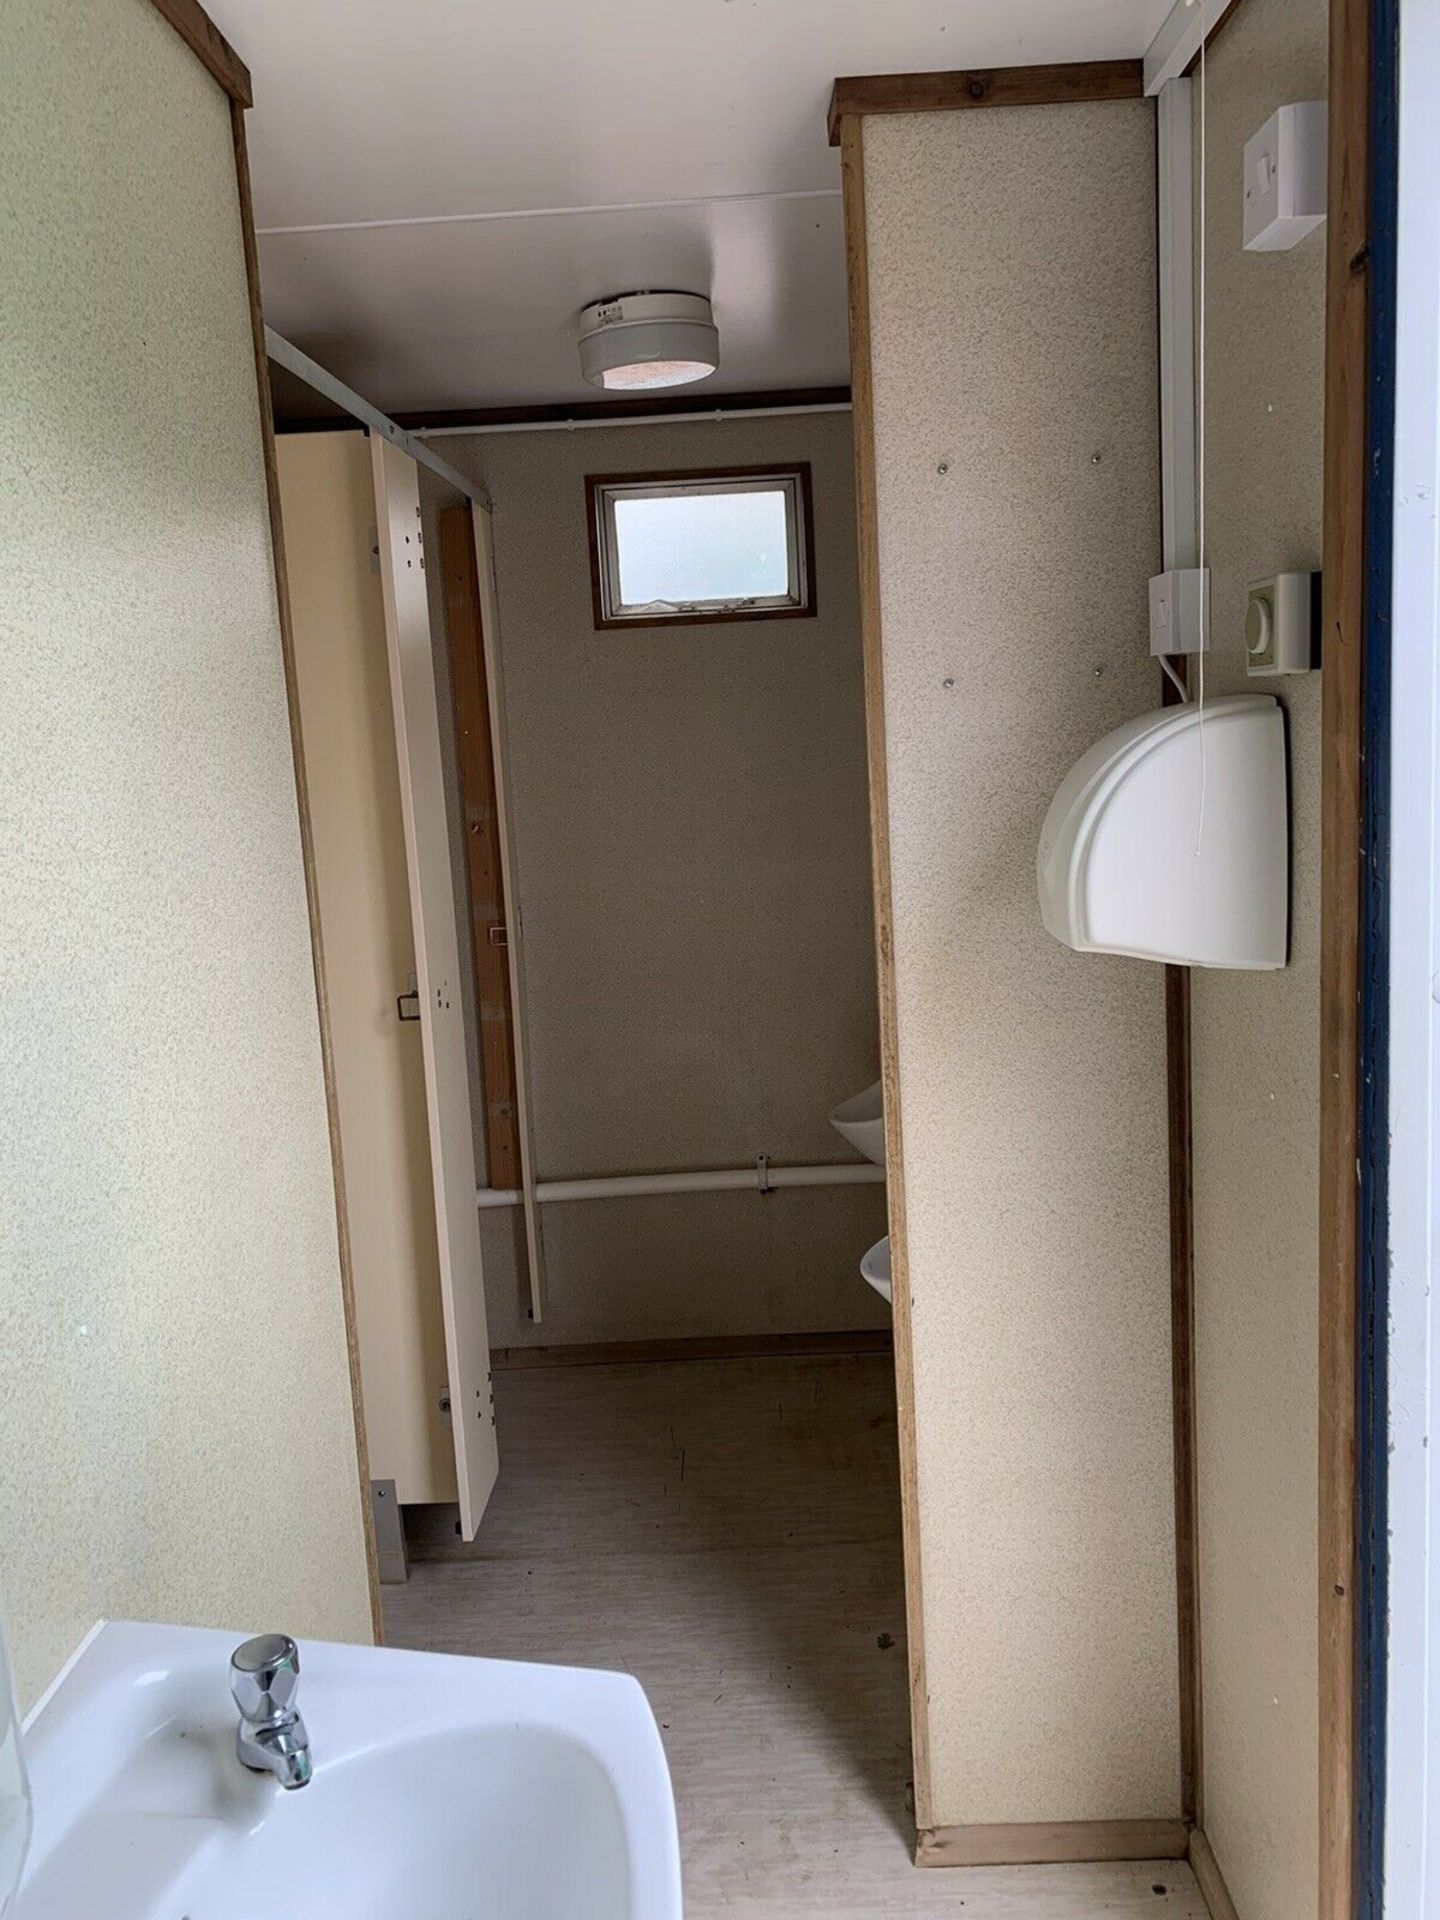 Portable Shower / Drying Room With Toilets - Image 10 of 11